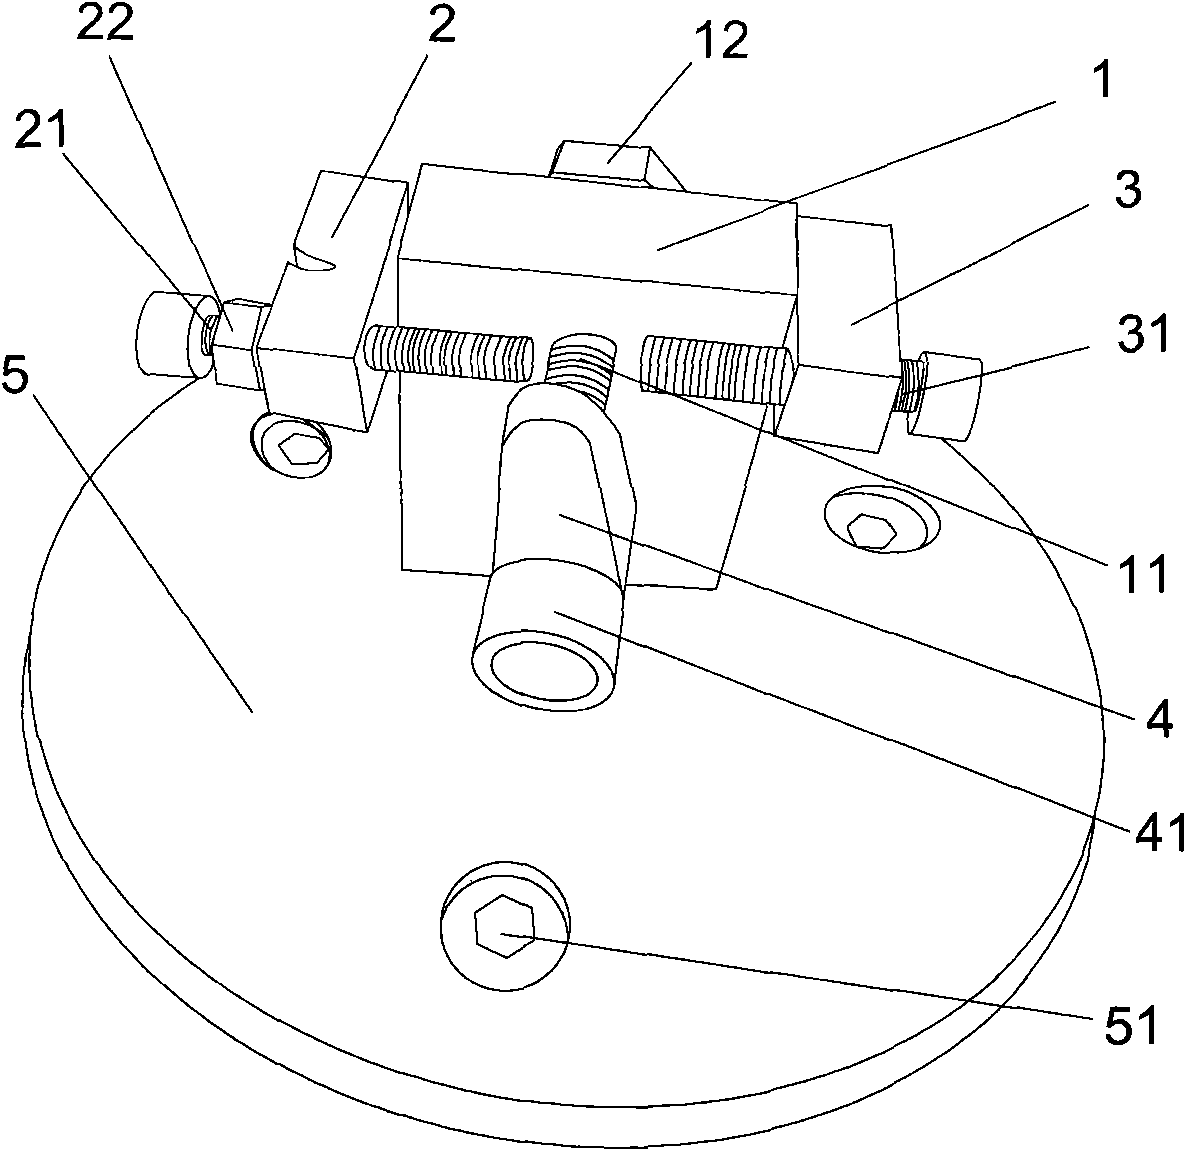 Pipe fixing device